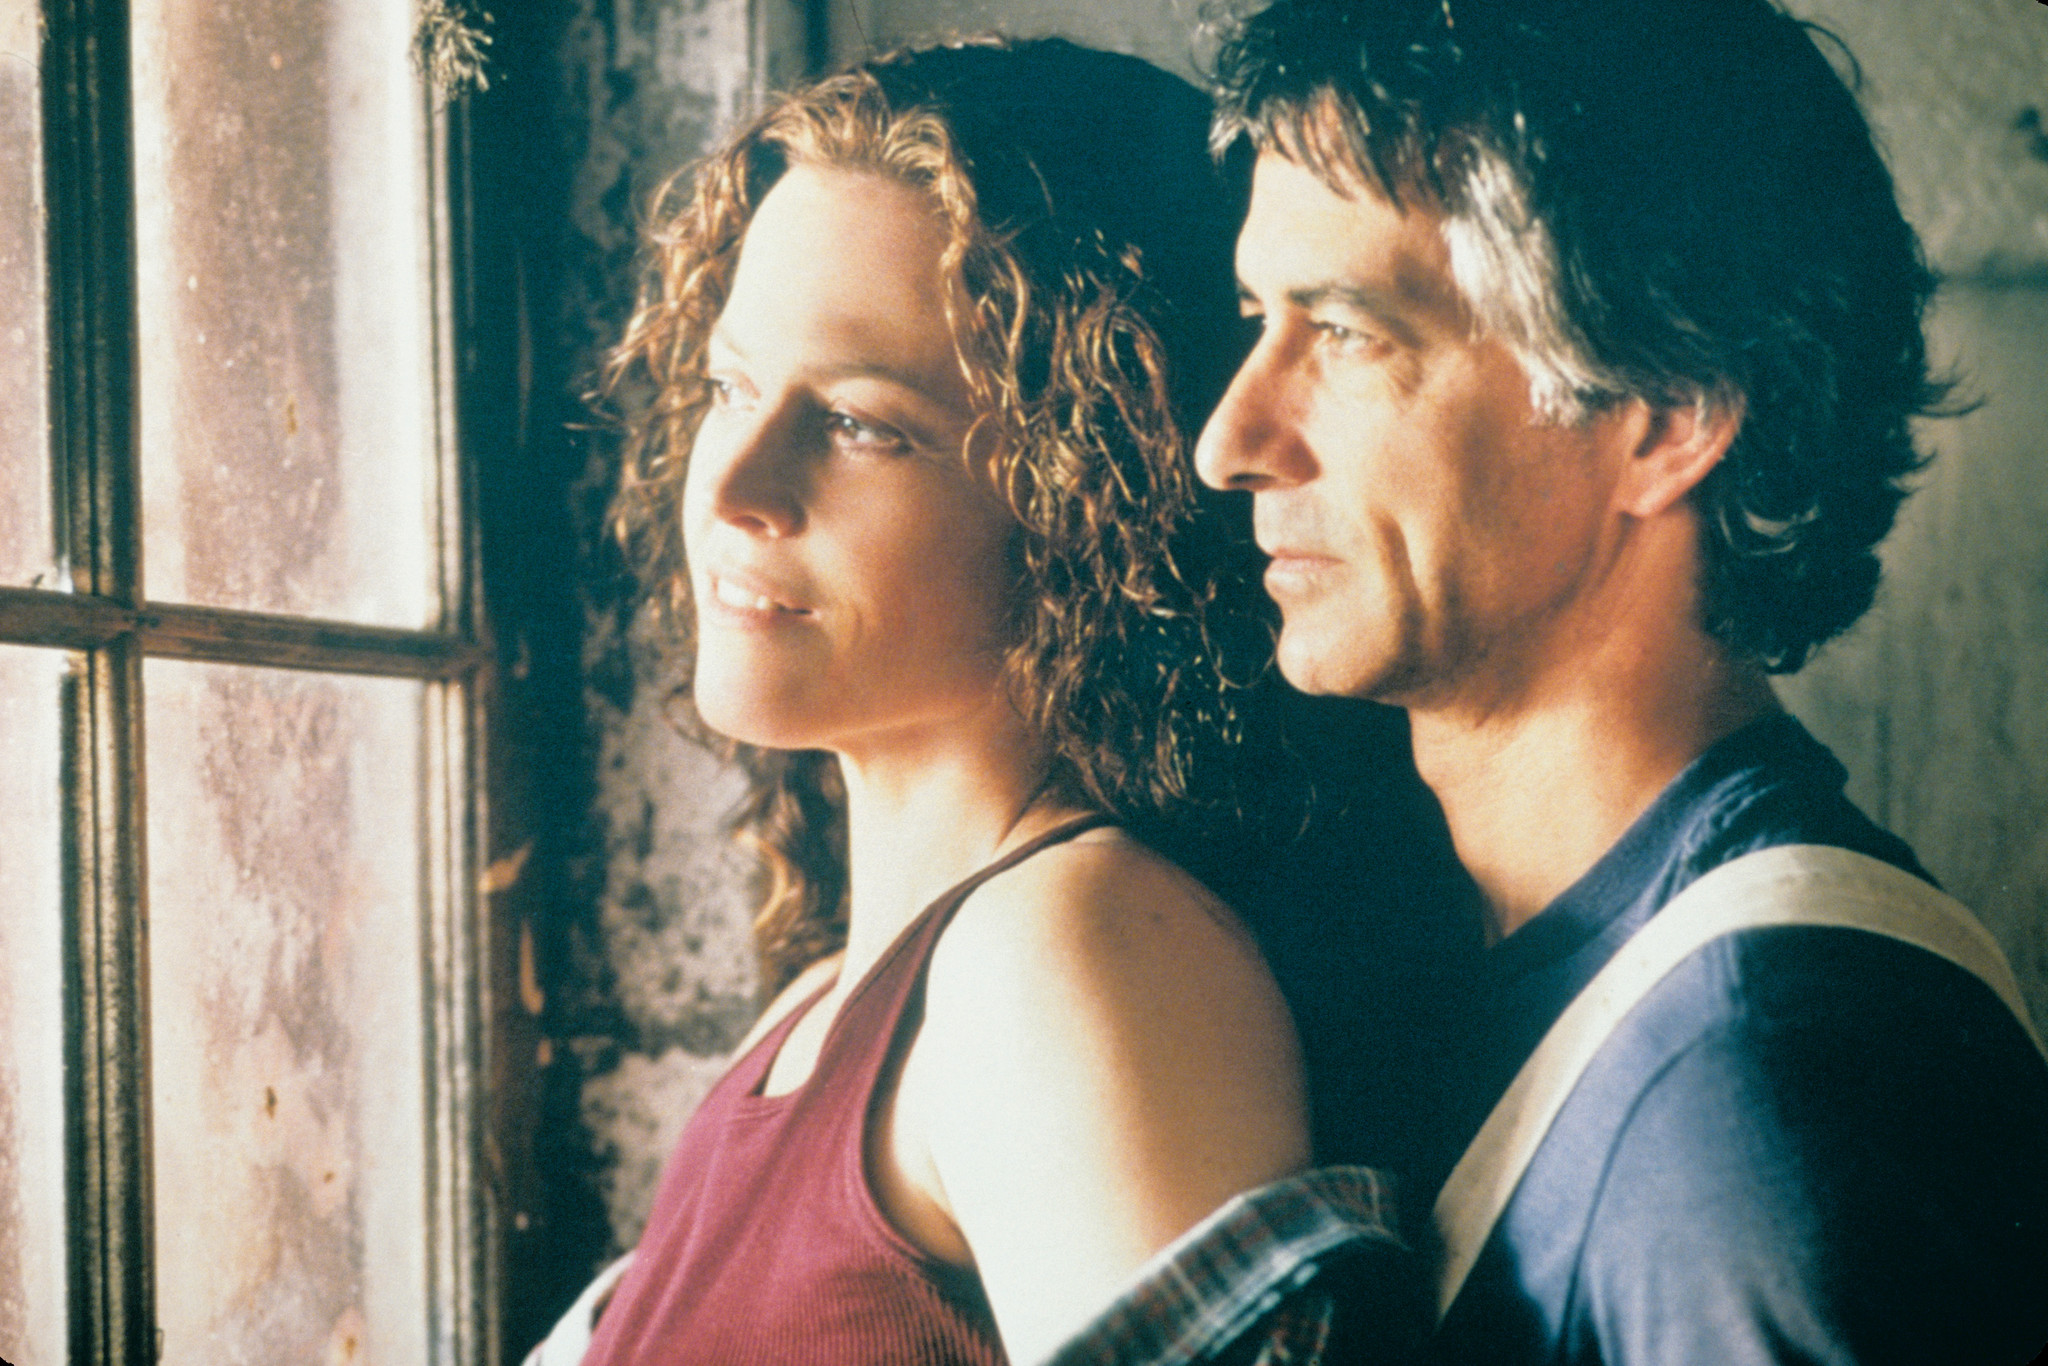 Sigourney Weaver and David Strathairn in A Map of the World (1999)